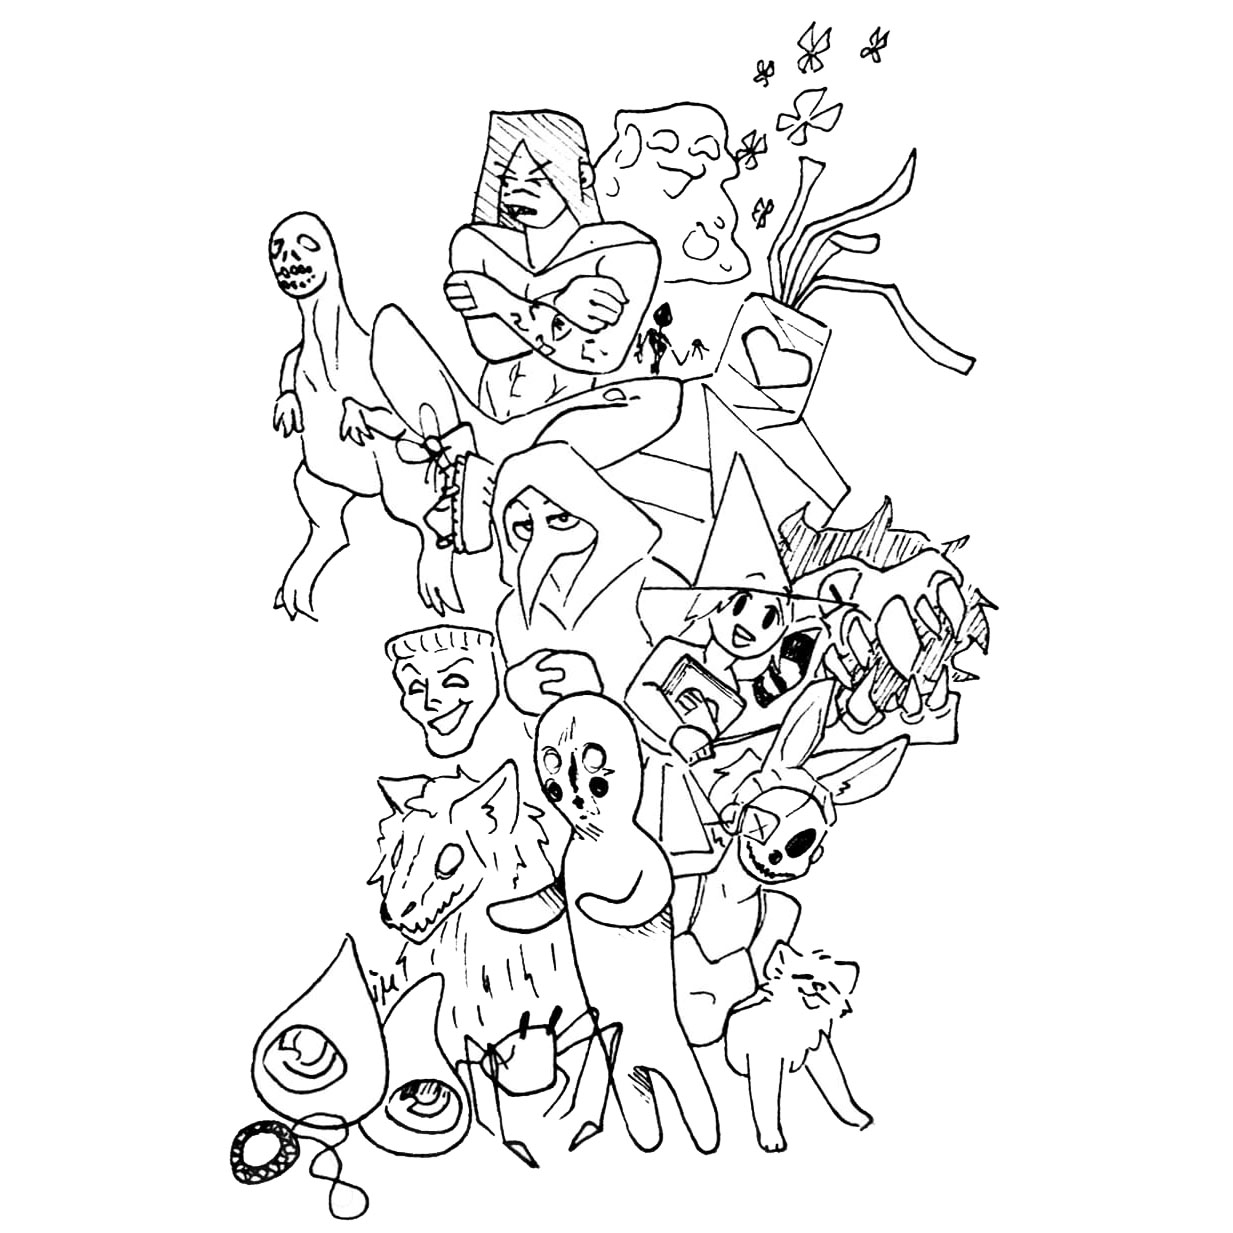 Scp-173 Coloring Pages Sticker Template - XColorings.com